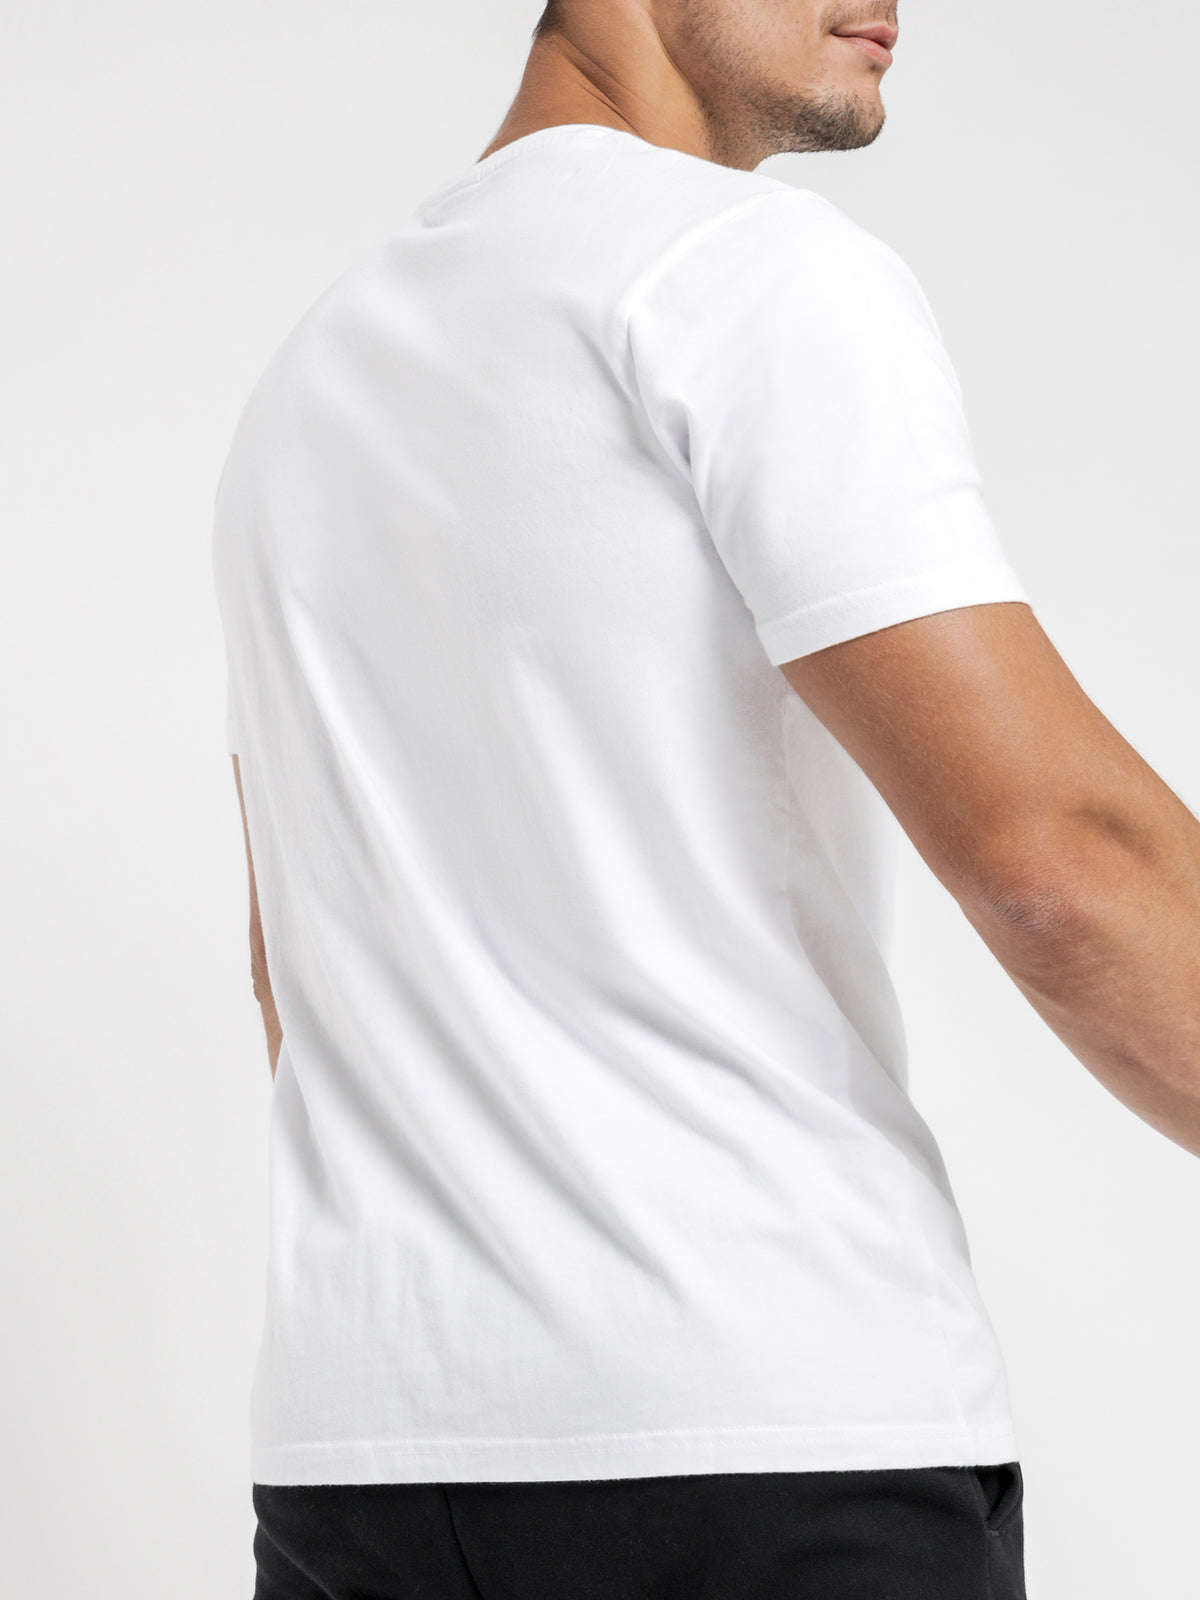 Canaletto T-Shirt in White